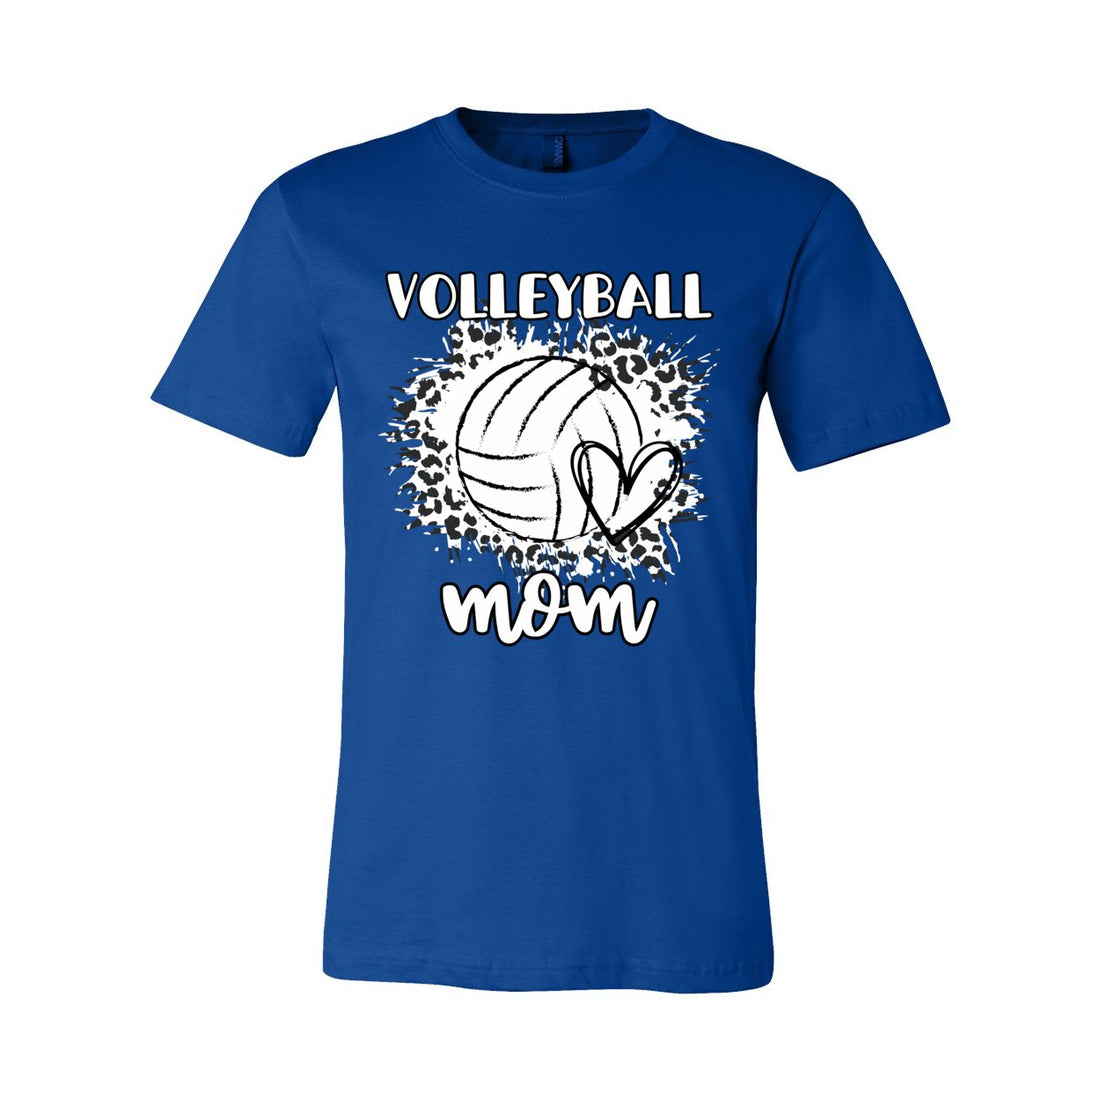 Volleyball Mom - T-Shirts - Positively Sassy - Volleyball Mom